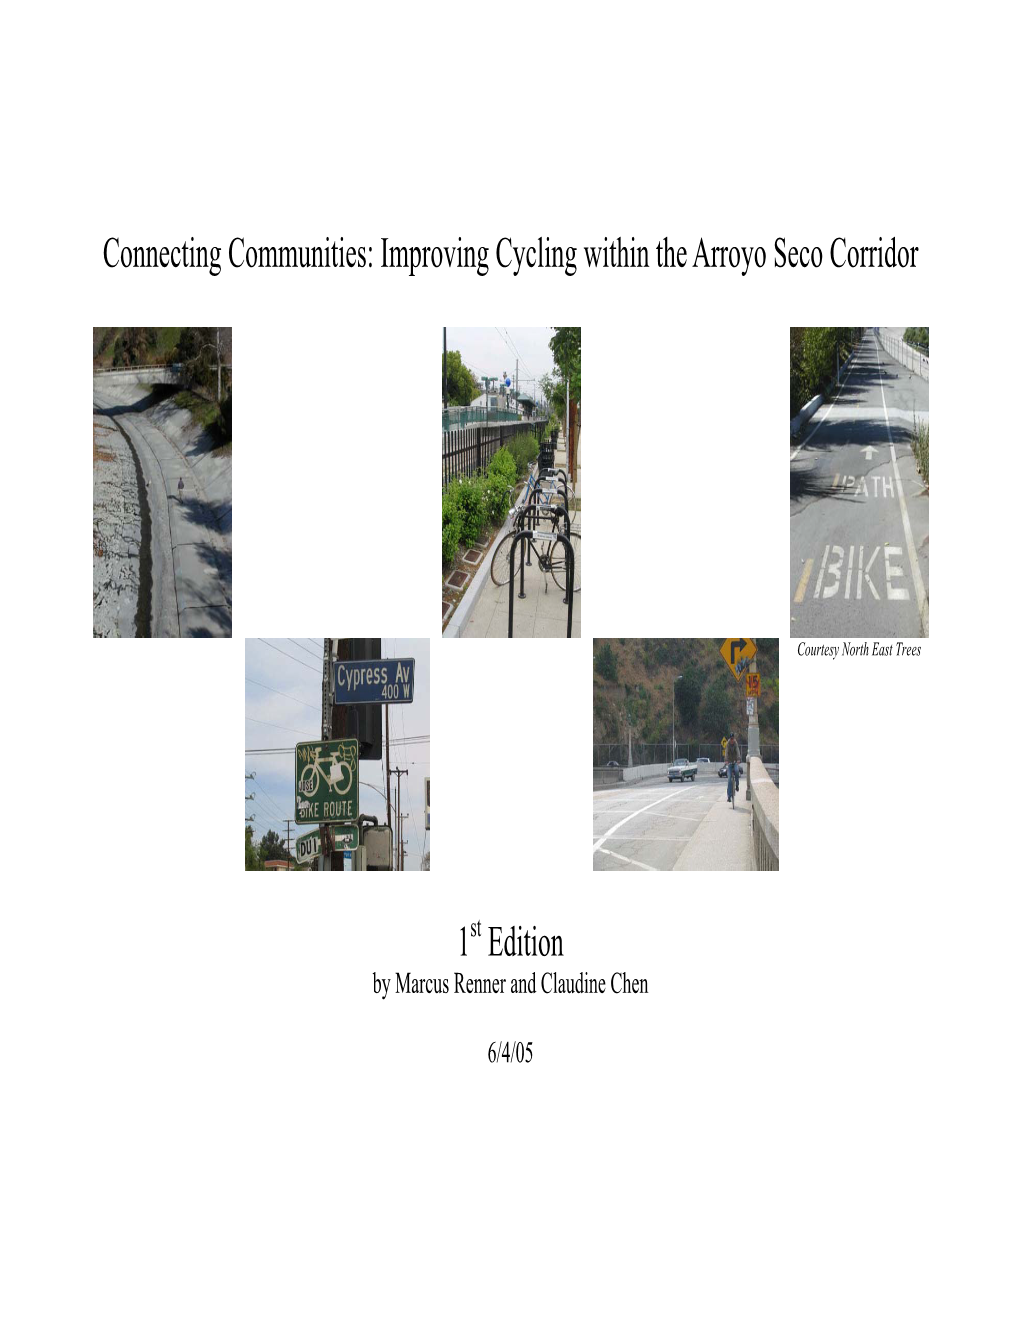 Improving Bicycling in the Arroyo Seco Corridor